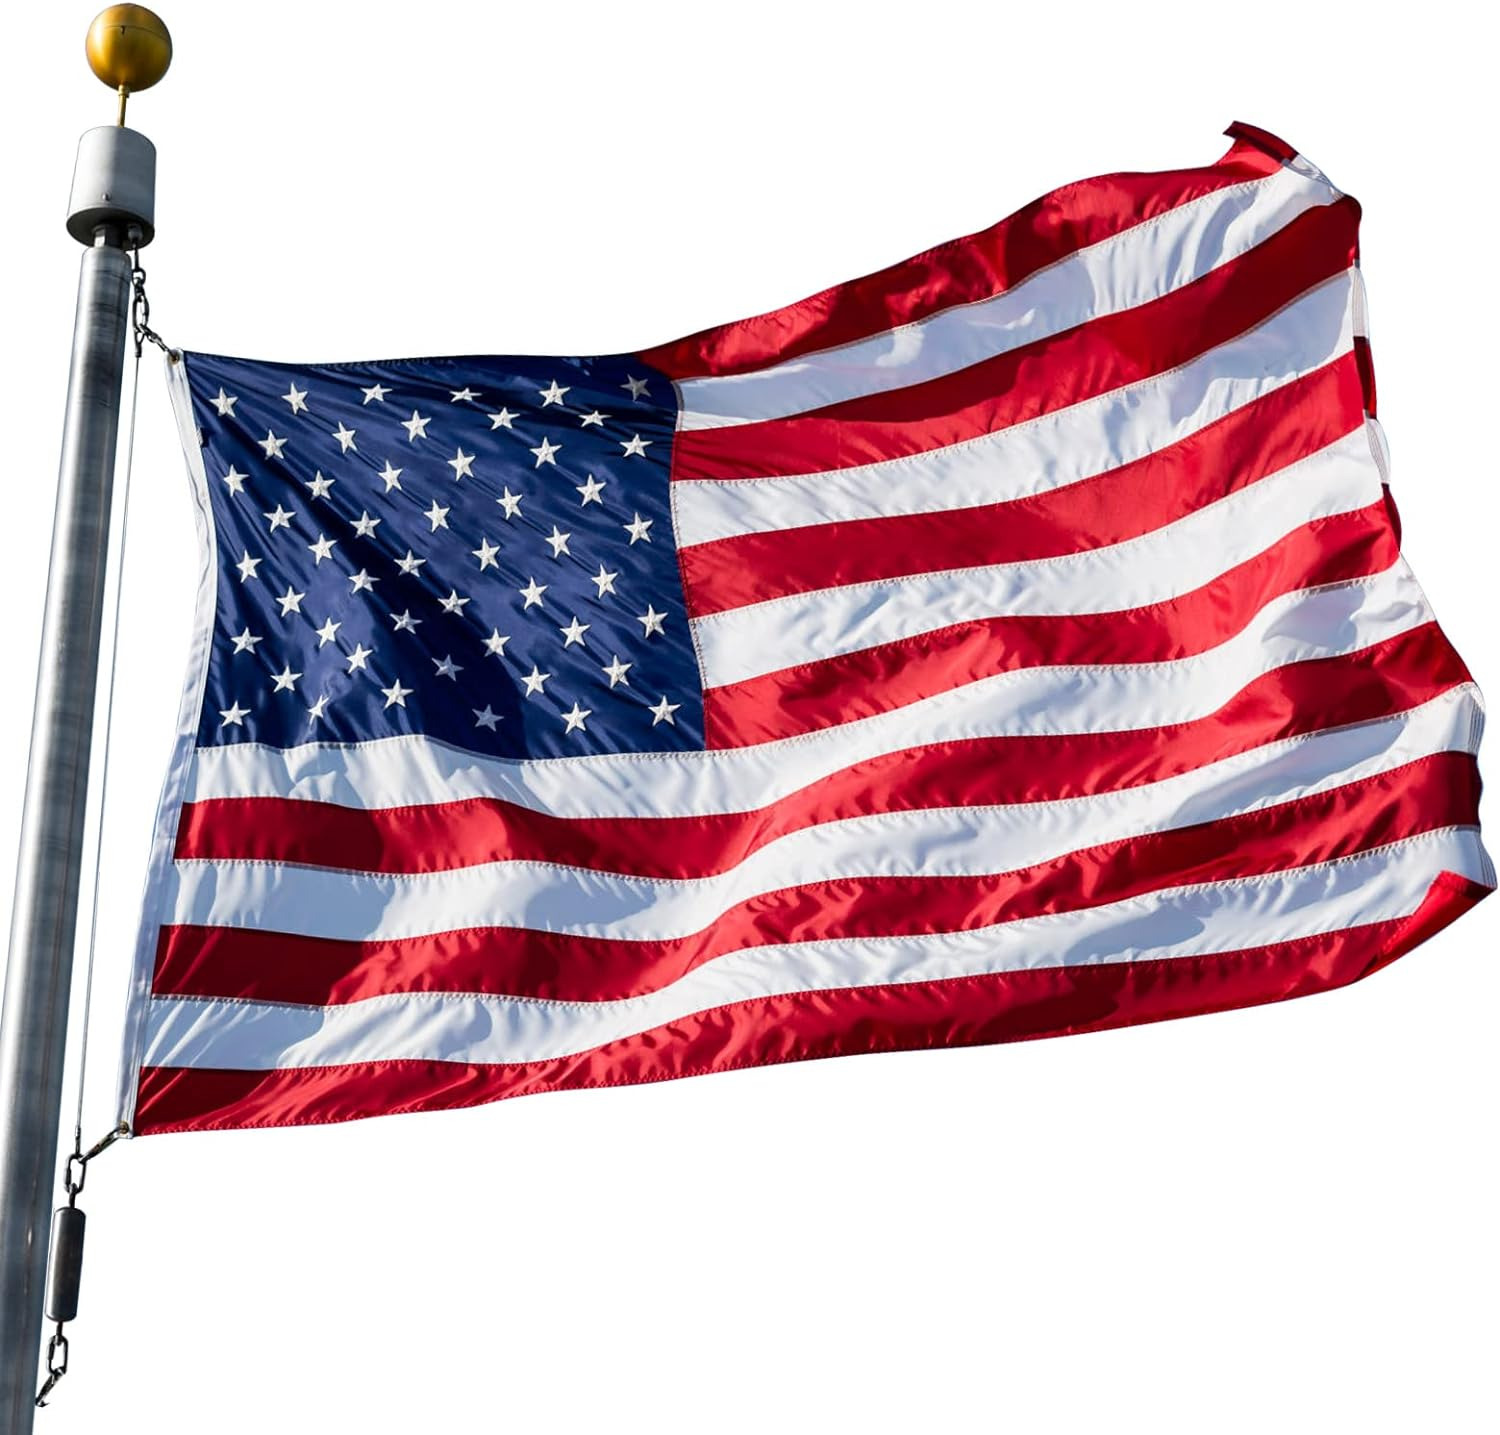 Premium American Flag 2X3 FT - Heavy Duty Nylon US Flags with Embroidered Stars,